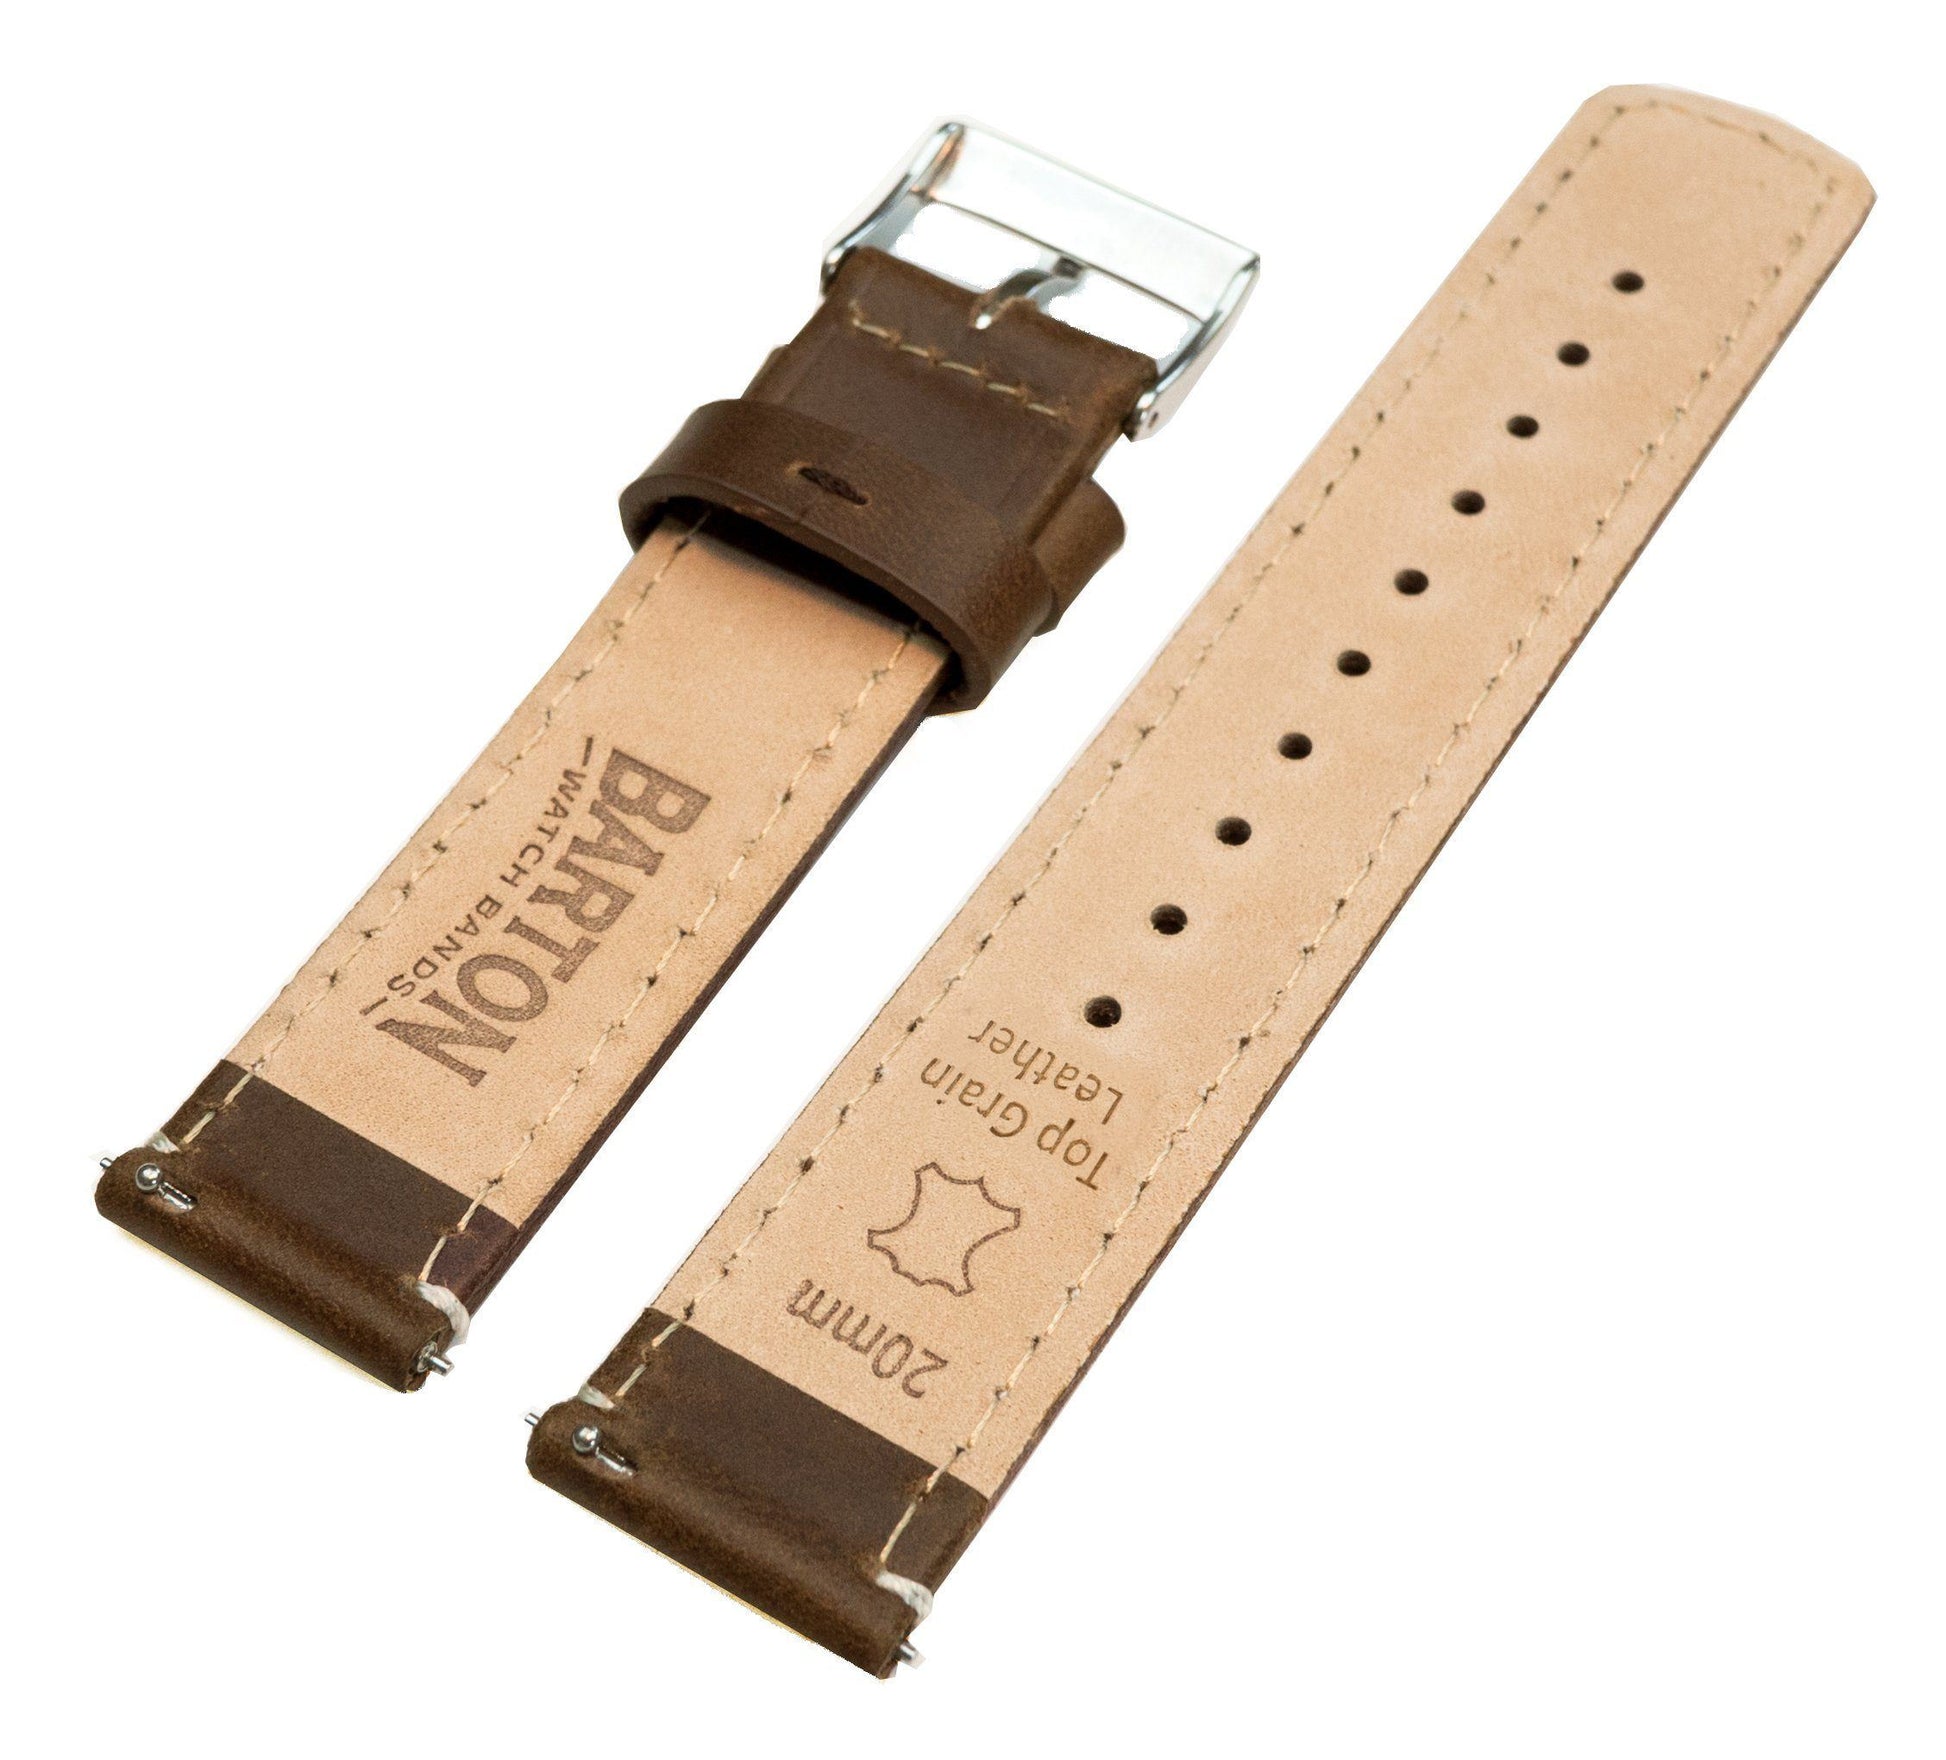 Samsung Galaxy Watch Active | Saddle Brown Leather & Linen White Stitching - Barton Watch Bands